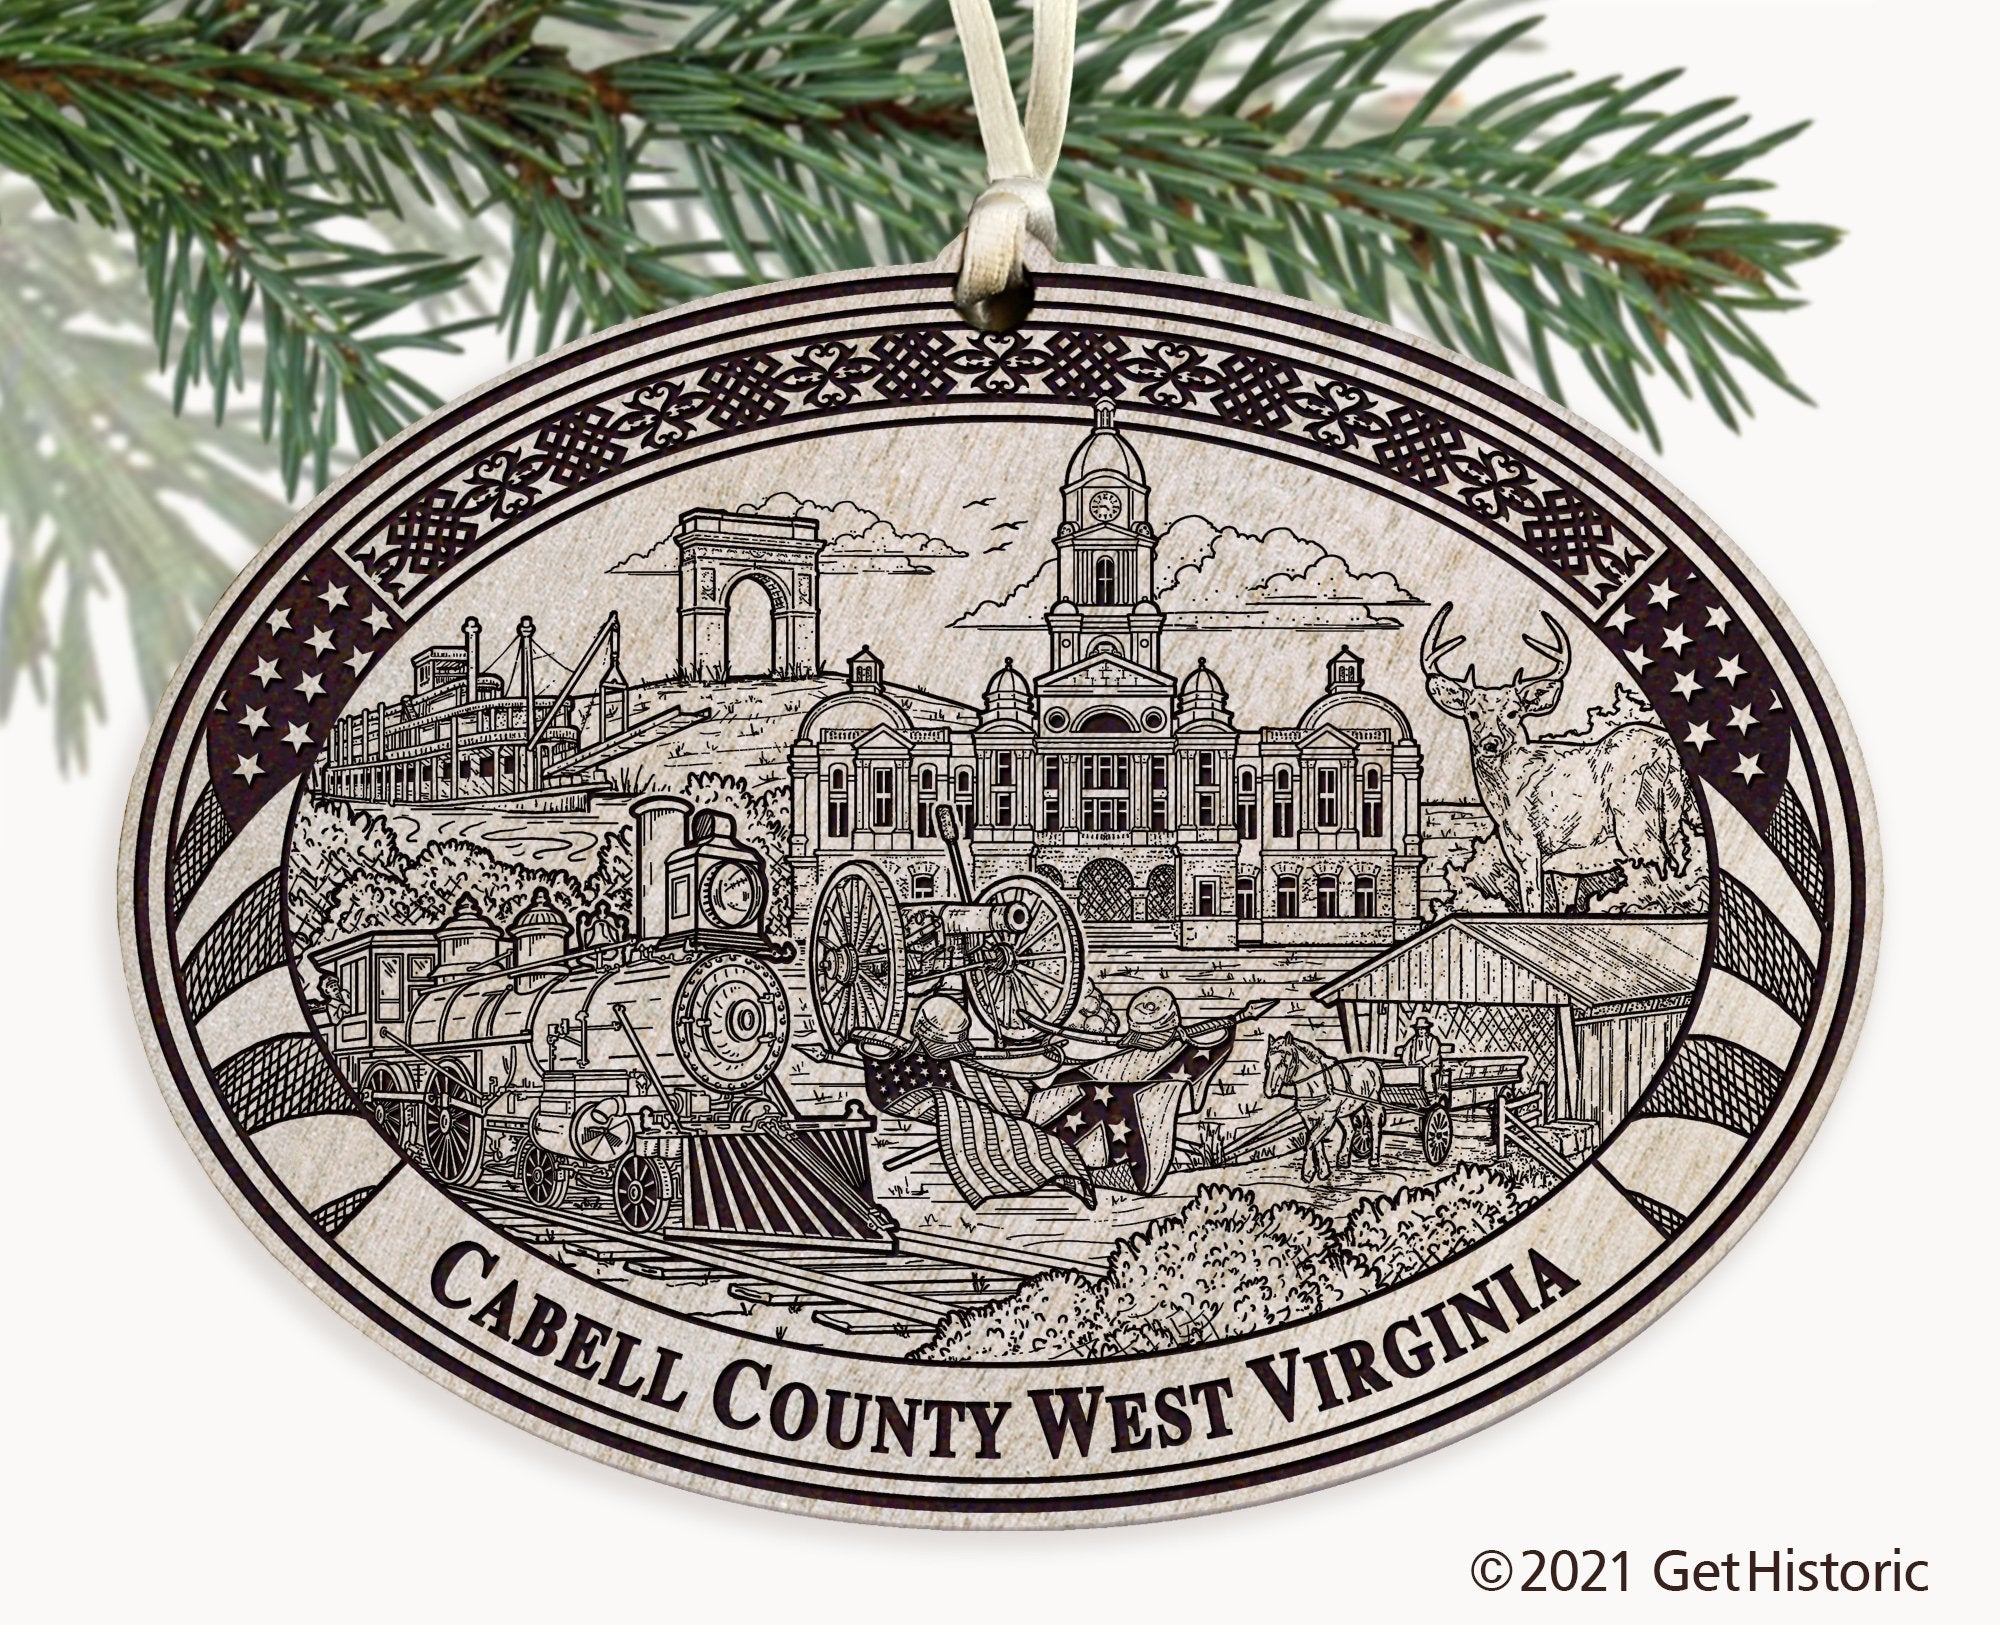 Cabell County West Virginia Engraved Ornament